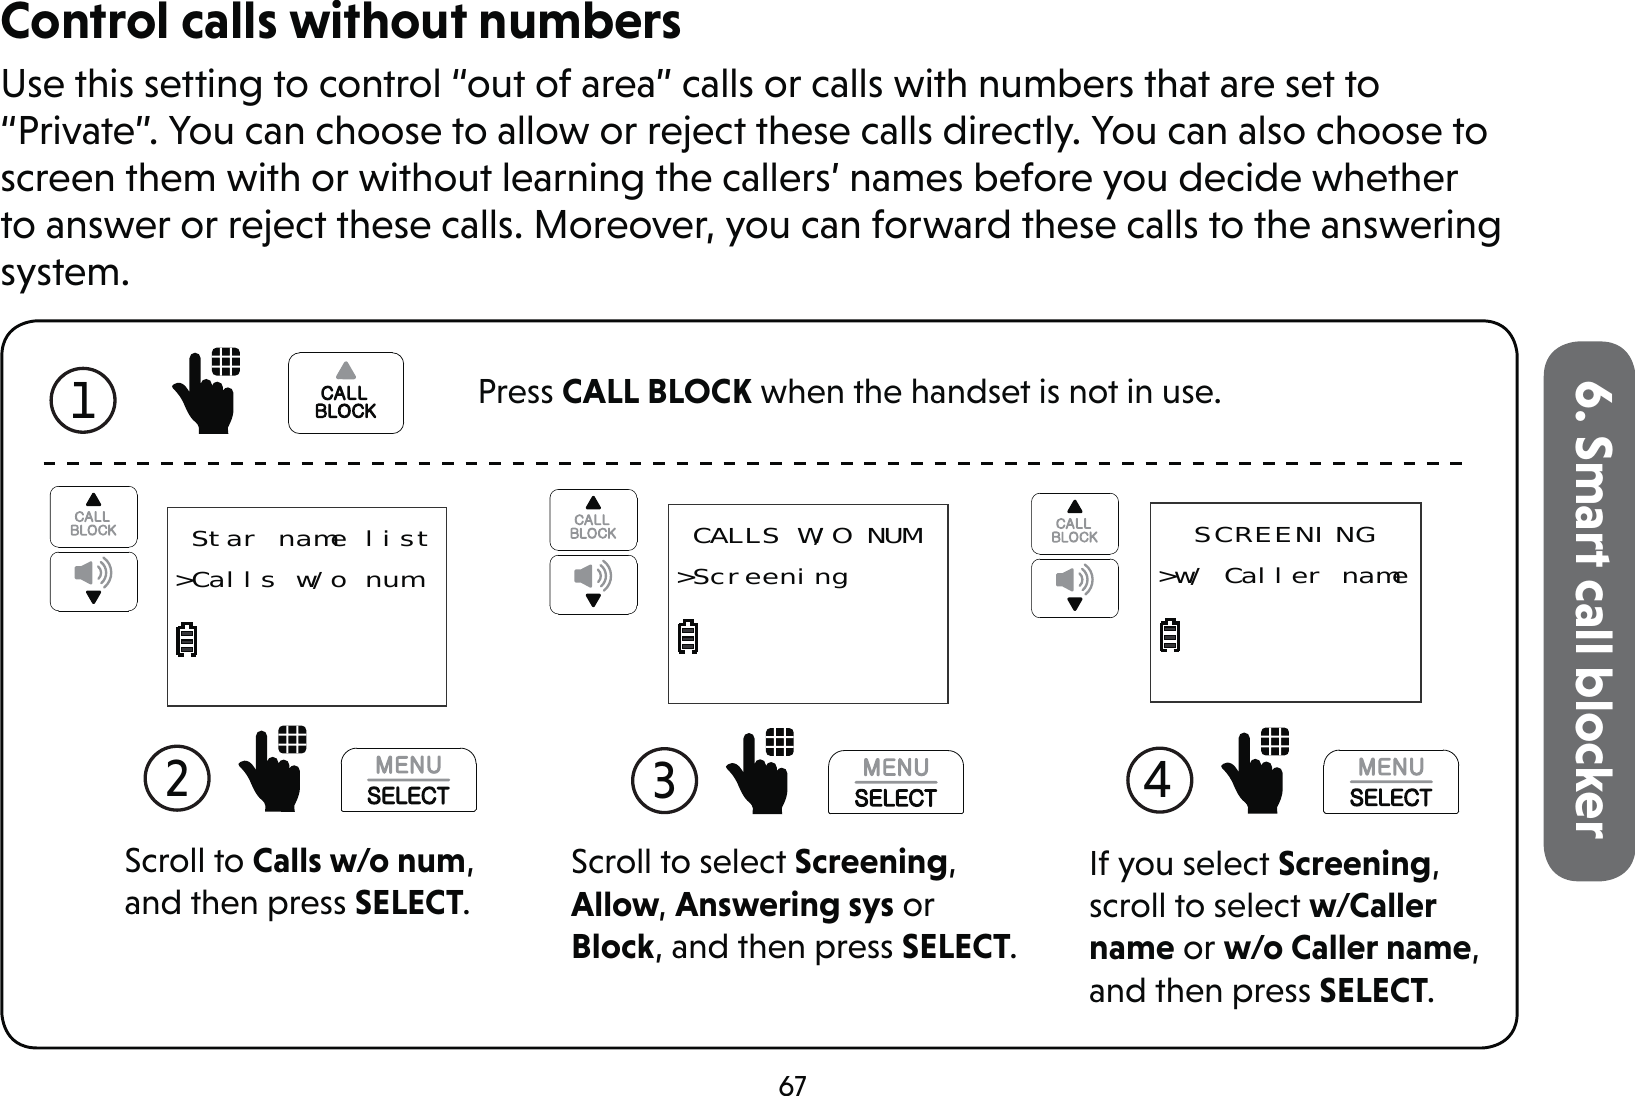 676. Smart call blockerControl calls without numbersUse this setting to control “out of area” calls or calls with numbers that are set to “Private”. You can choose to allow or reject these calls directly. You can also choose to screen them with or without learning the callers’ names before you decide whether to answer or reject these calls. Moreover, you can forward these calls to the answering system.Scroll to select Screening, Allow, Answering sys or Block, and then press SELECT. CALLS W/O NUM&gt;Screening3  Star name list&gt;Calls w/o numScroll to Calls w/o num, and then press SELECT.2 If you select Screening, scroll to select w/Caller name or w/o Caller name, and then press SELECT.SCREENING&gt;w/ Caller name4 1 Press CALL BLOCK when the handset is not in use.